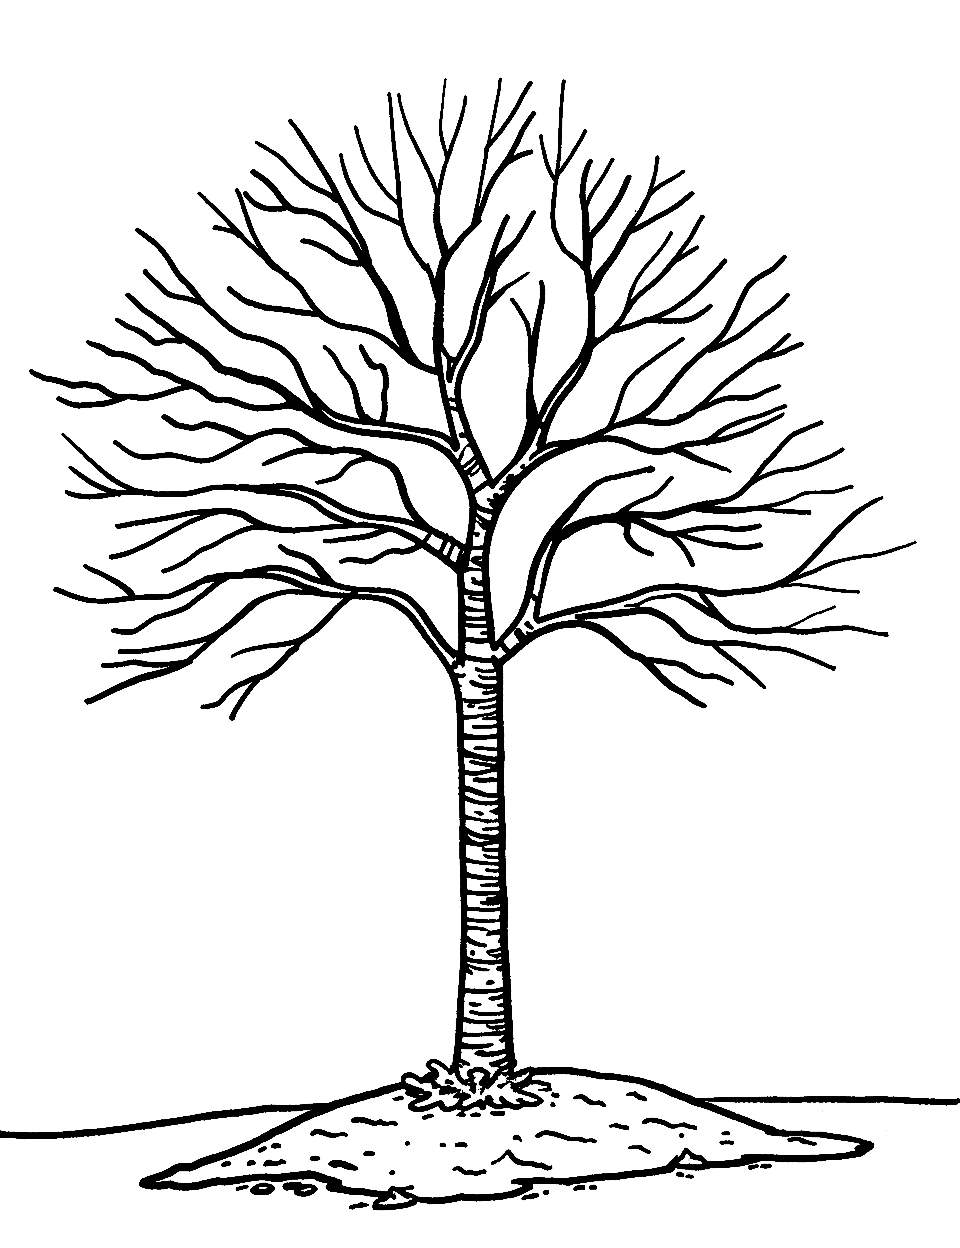 Bare Tree in Winter Coloring Page - A lone tree without leaves, with a snow-covered ground beneath it.